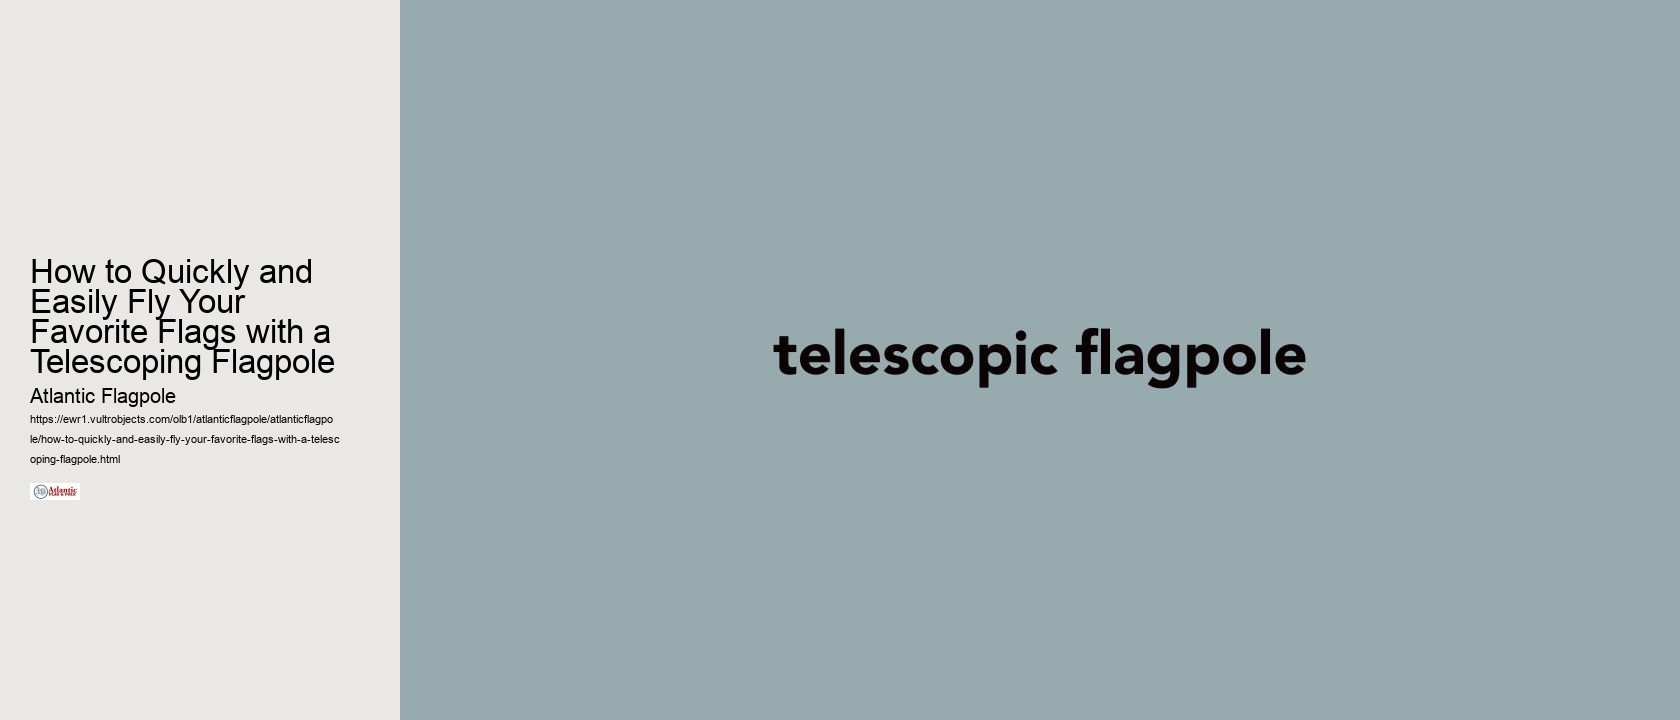 How to Quickly and Easily Fly Your Favorite Flags with a Telescoping Flagpole